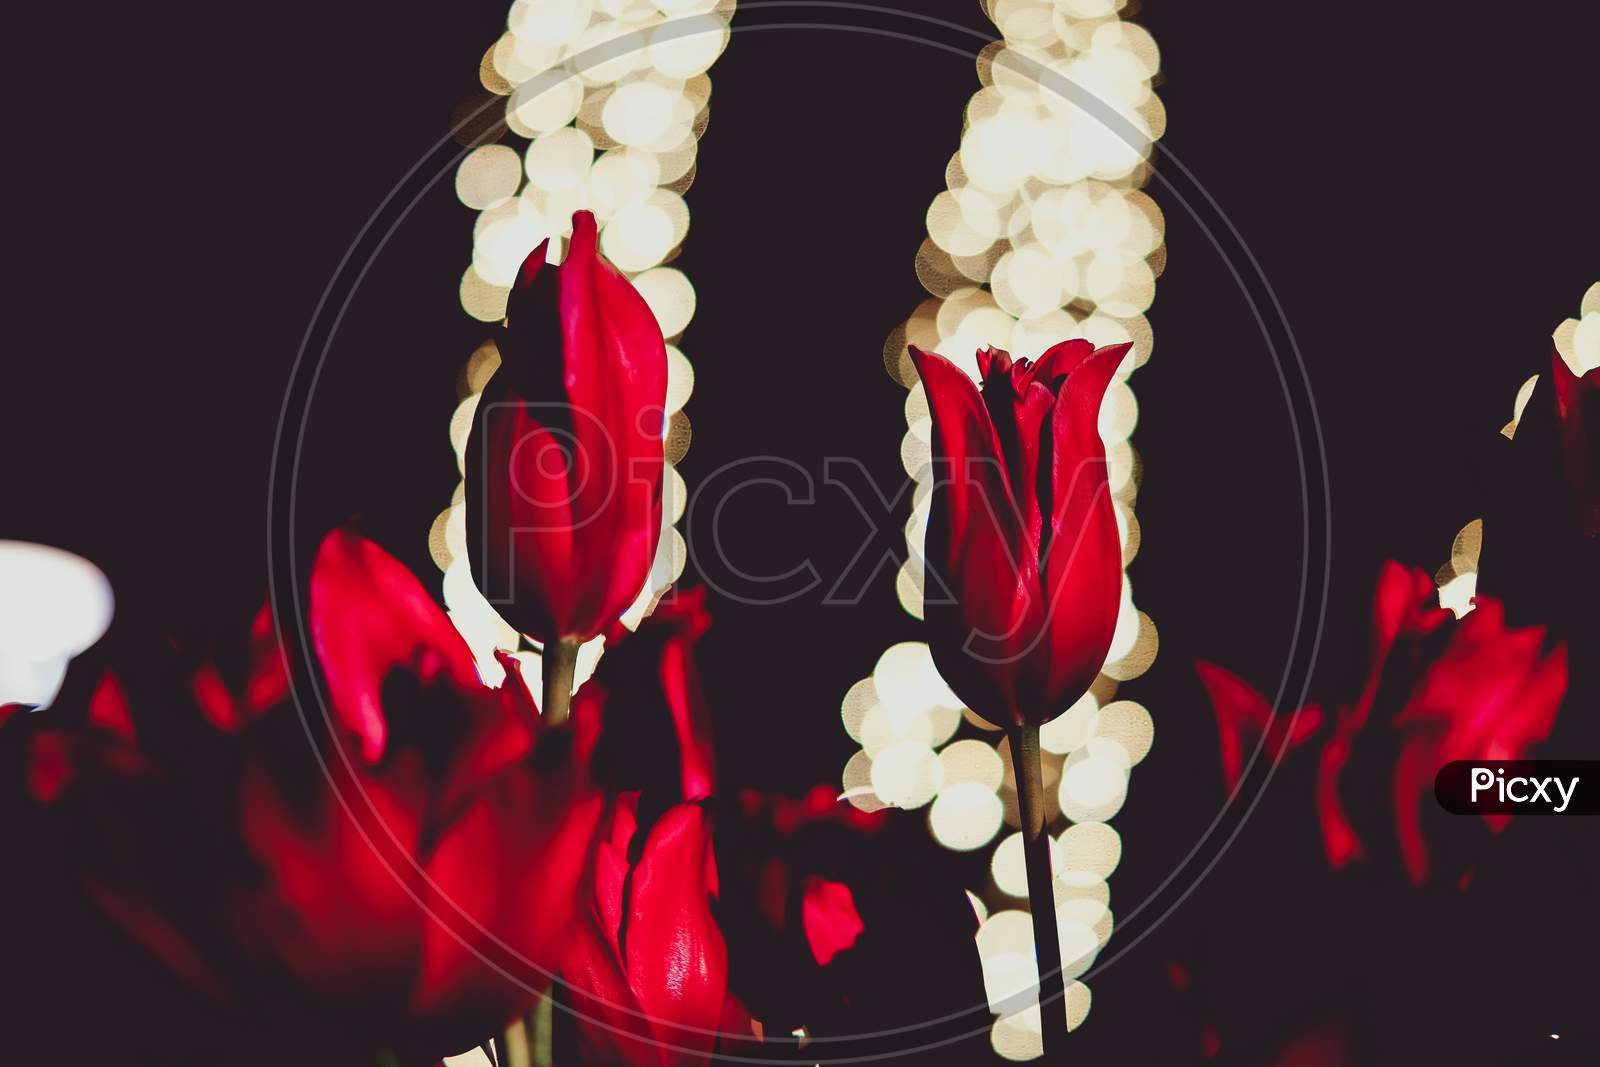 Red Tulip And The Light Of The Spotlight